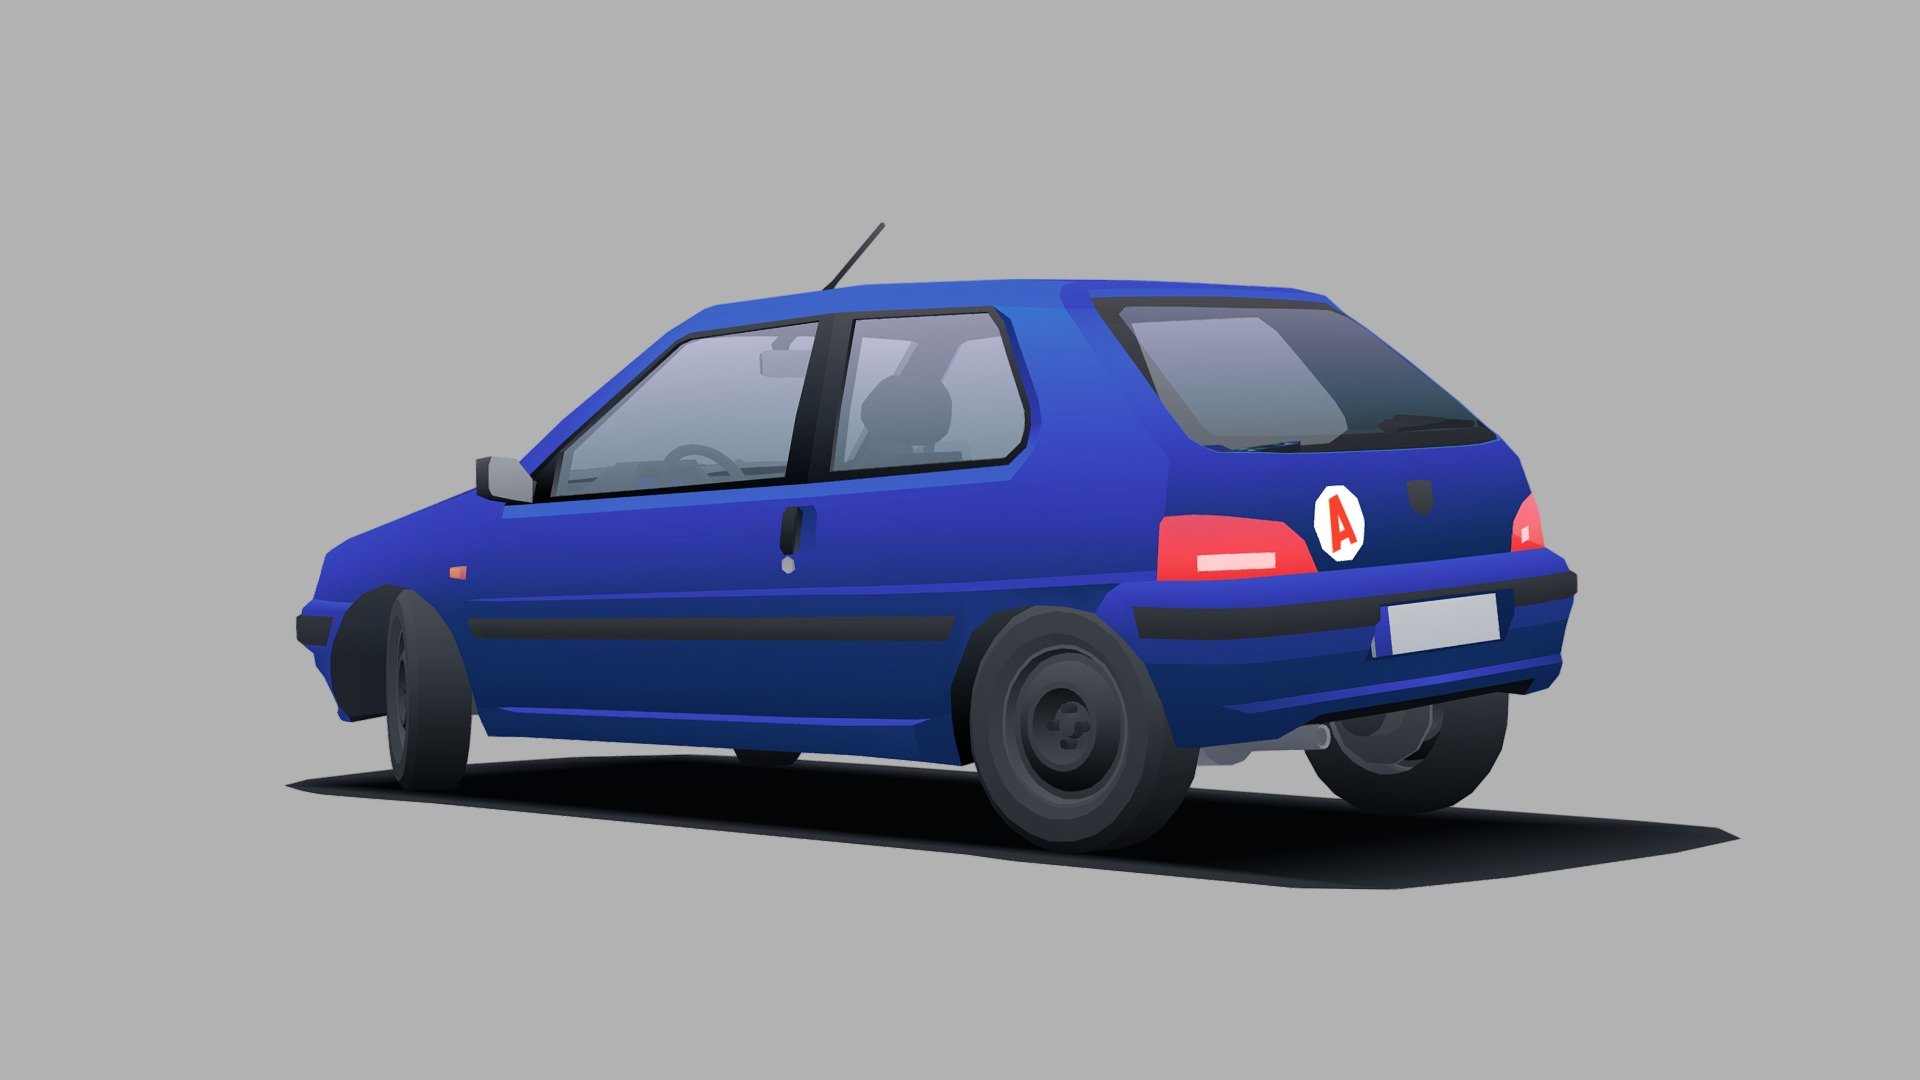 Here is a model of a Peugeot 106 Phase 2 1.1 Mid/Low-poly (About 10K including a partial interior modeling) and a gradient image for the main textures - Peugeot 106 1.1 - 3D model by Arthur Bourgeais (@arthur.brgs) 3d model